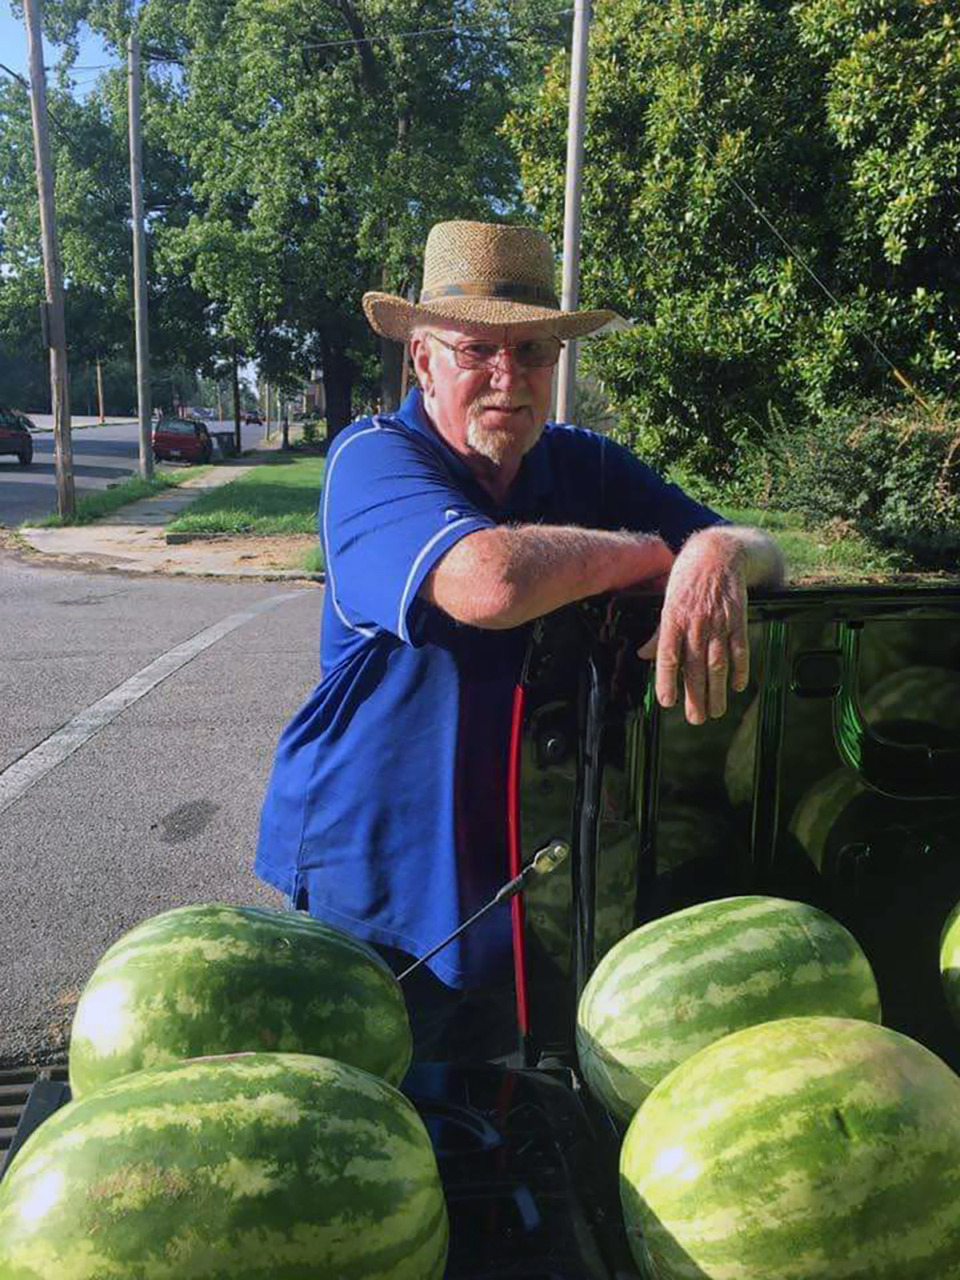 <strong>John Materna, 76, died May 29, two weeks after he was shot during a May 15 robbery while selling watermelons at Homer Street and Wayne Avenue in The Heights neighborhood.</strong> (Courtesy April Stokes)